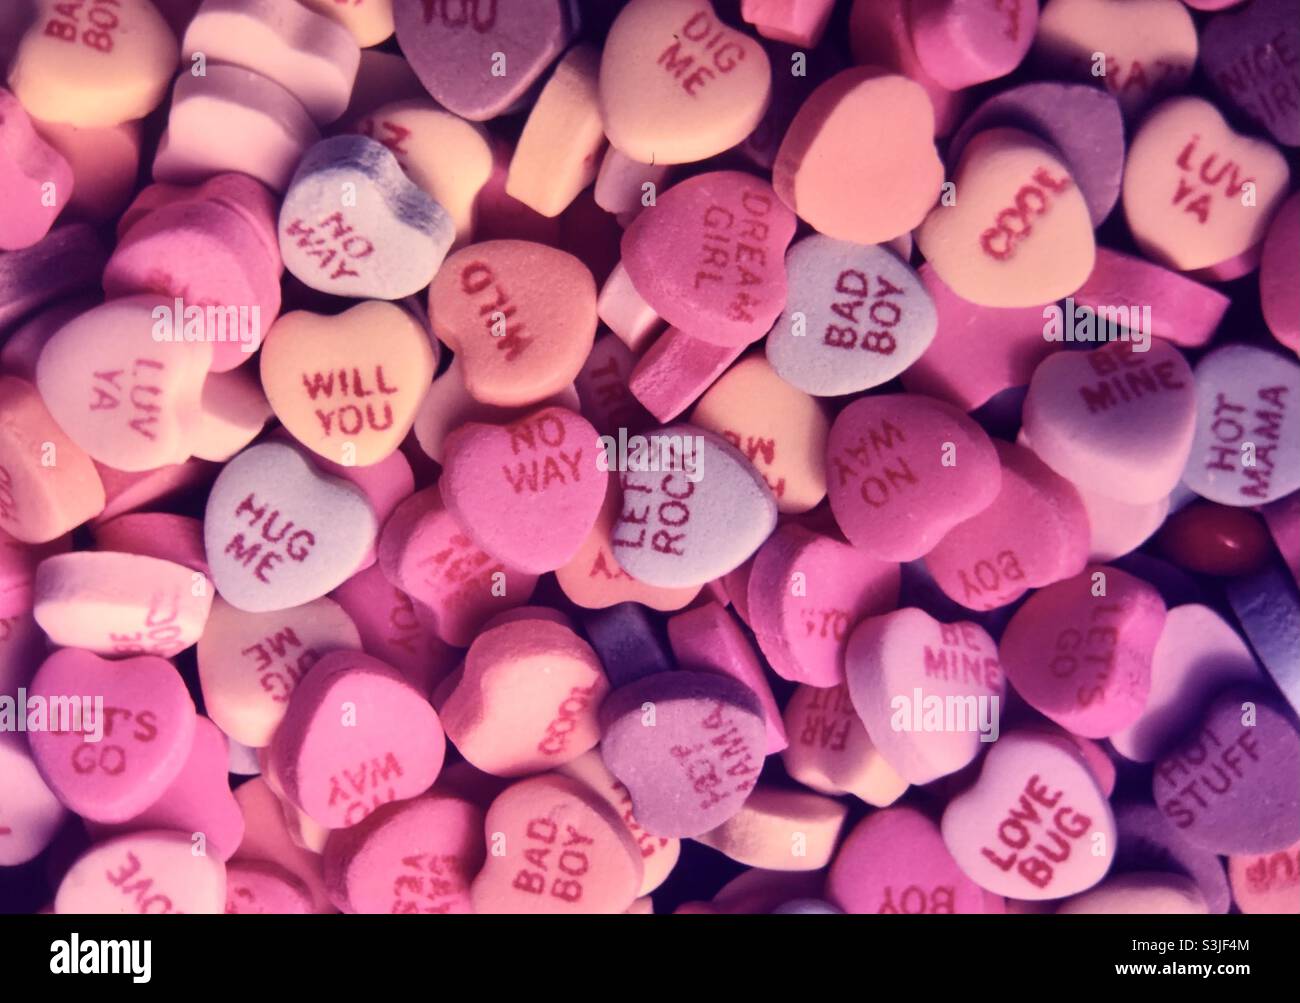 Valentines Candy Hearts with sayings Stock Photo